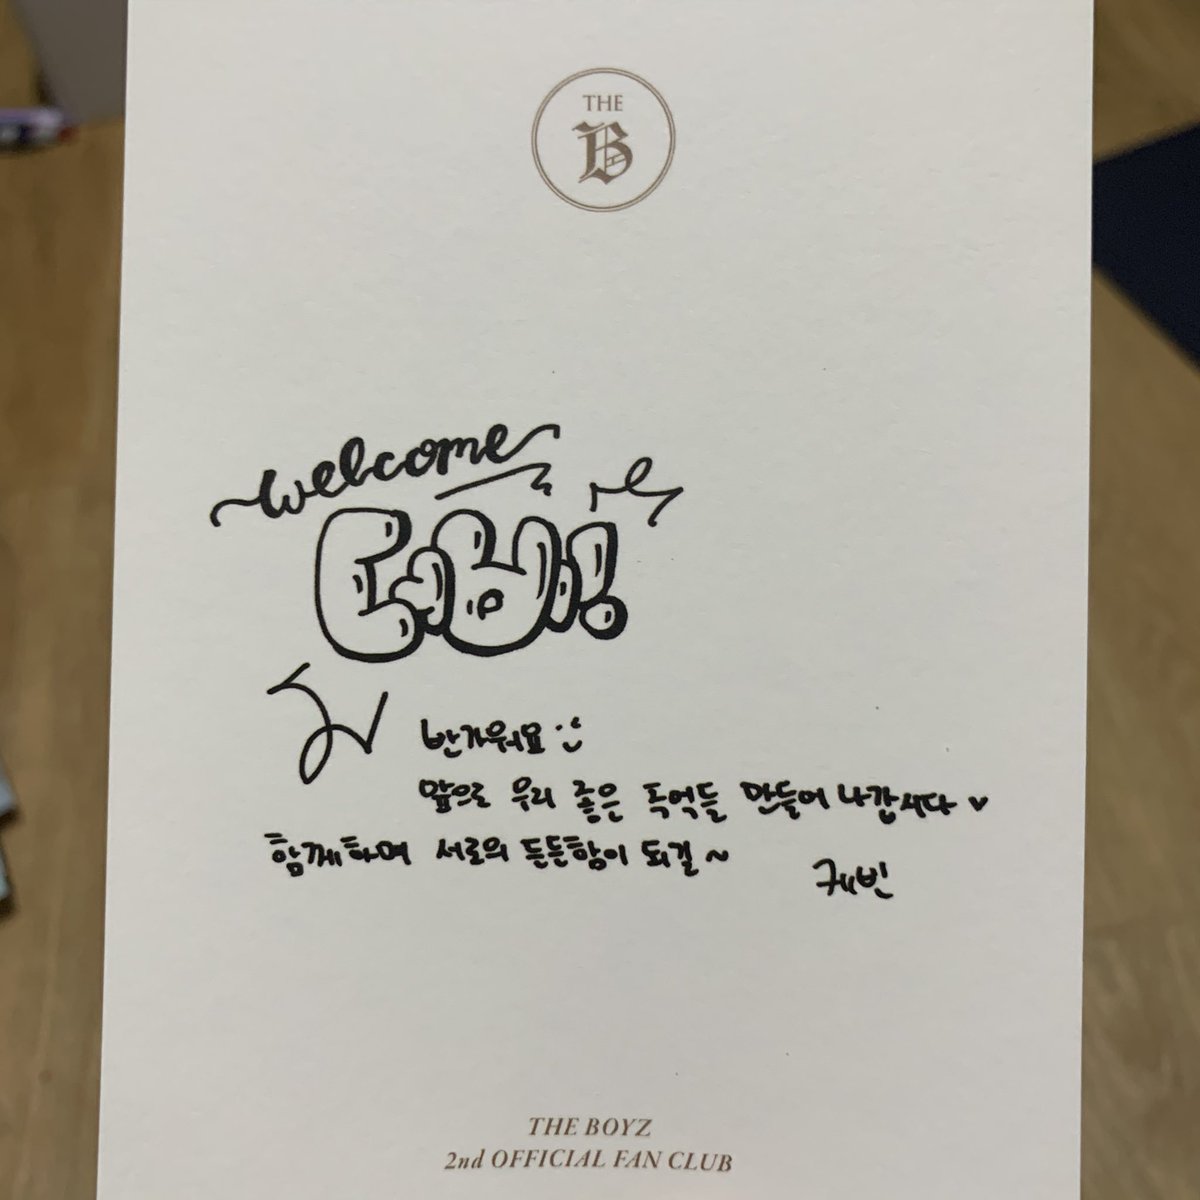 welcome deobi! nice to meet youlet’s make a lot of good memories from now on♡as long as we are together, i hope we can be each other’s place of comfort~ kevin